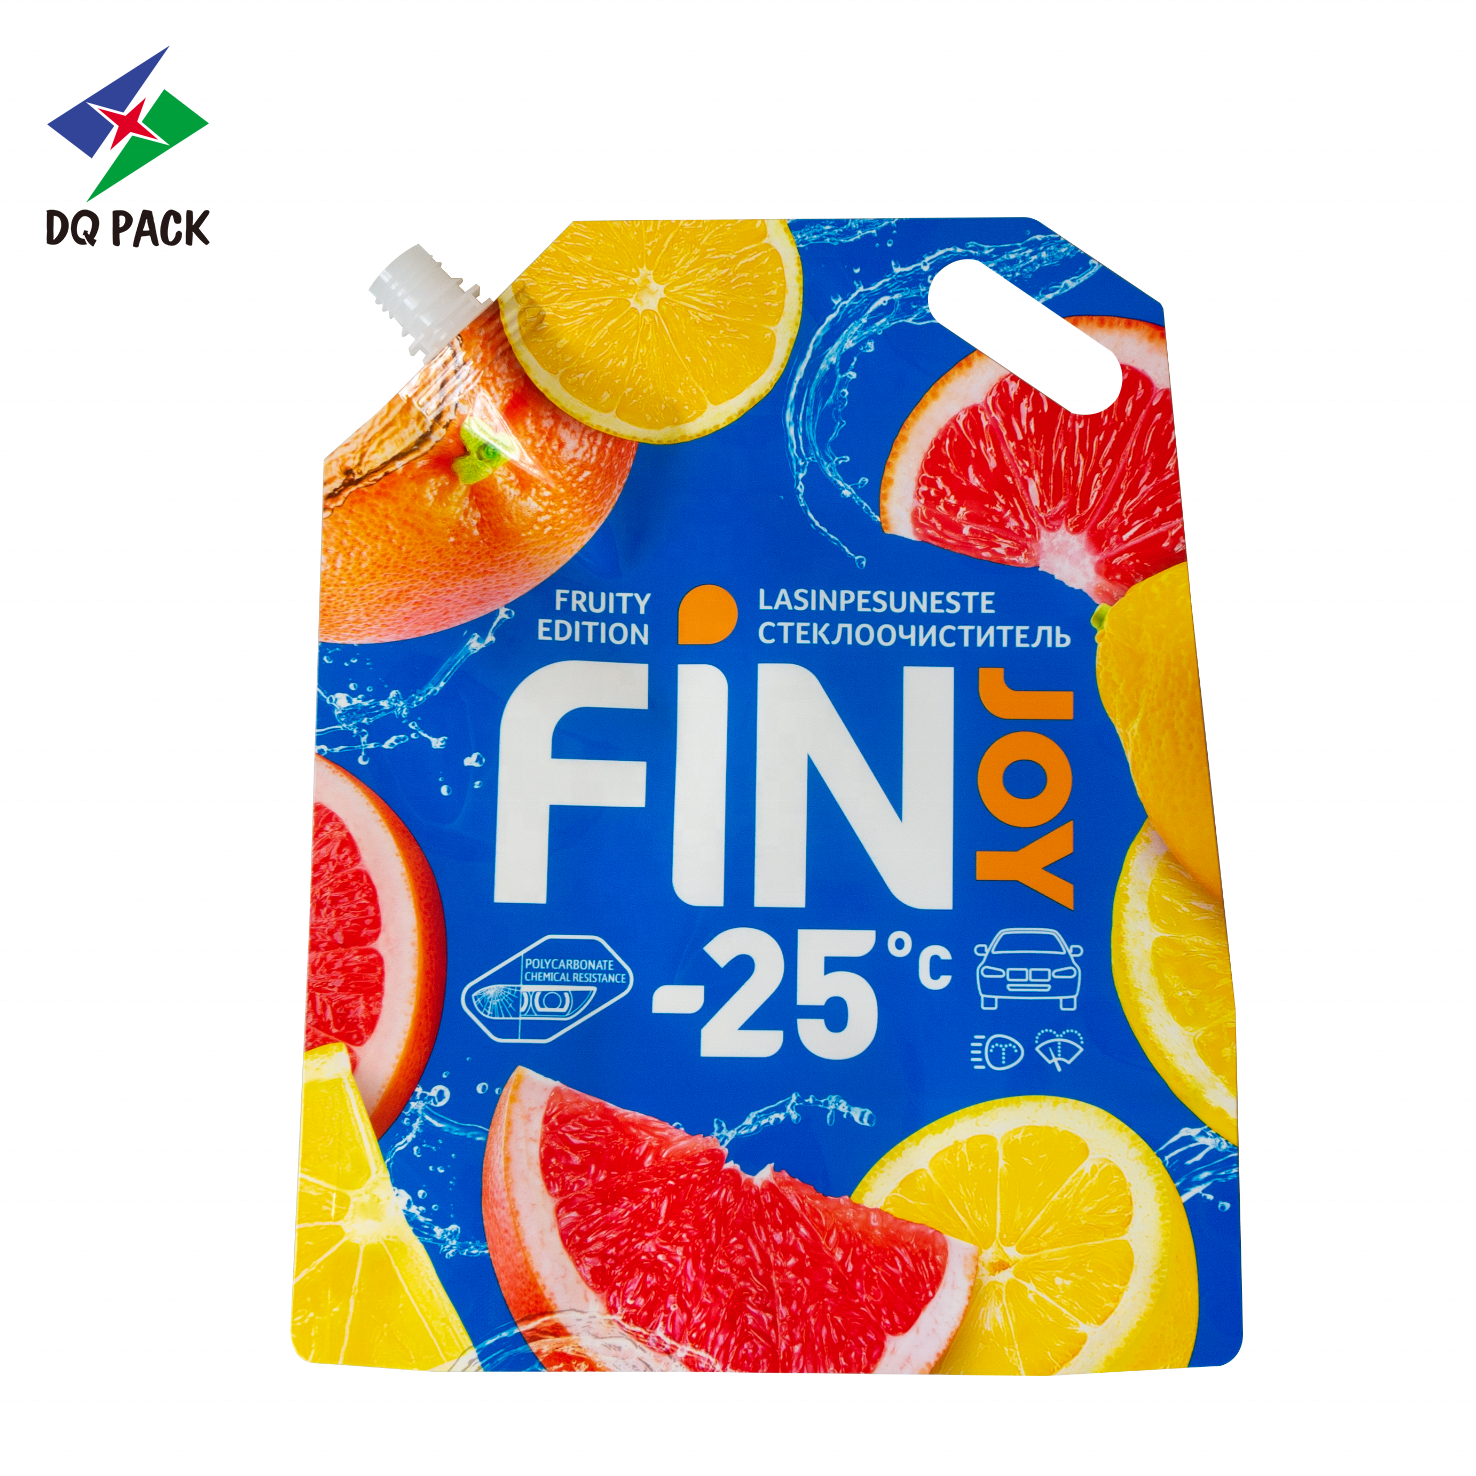 DQ PACK Colorful Liquid And Beverage Juice Stand Up Pouch With Corner Plastic Packaging Bag